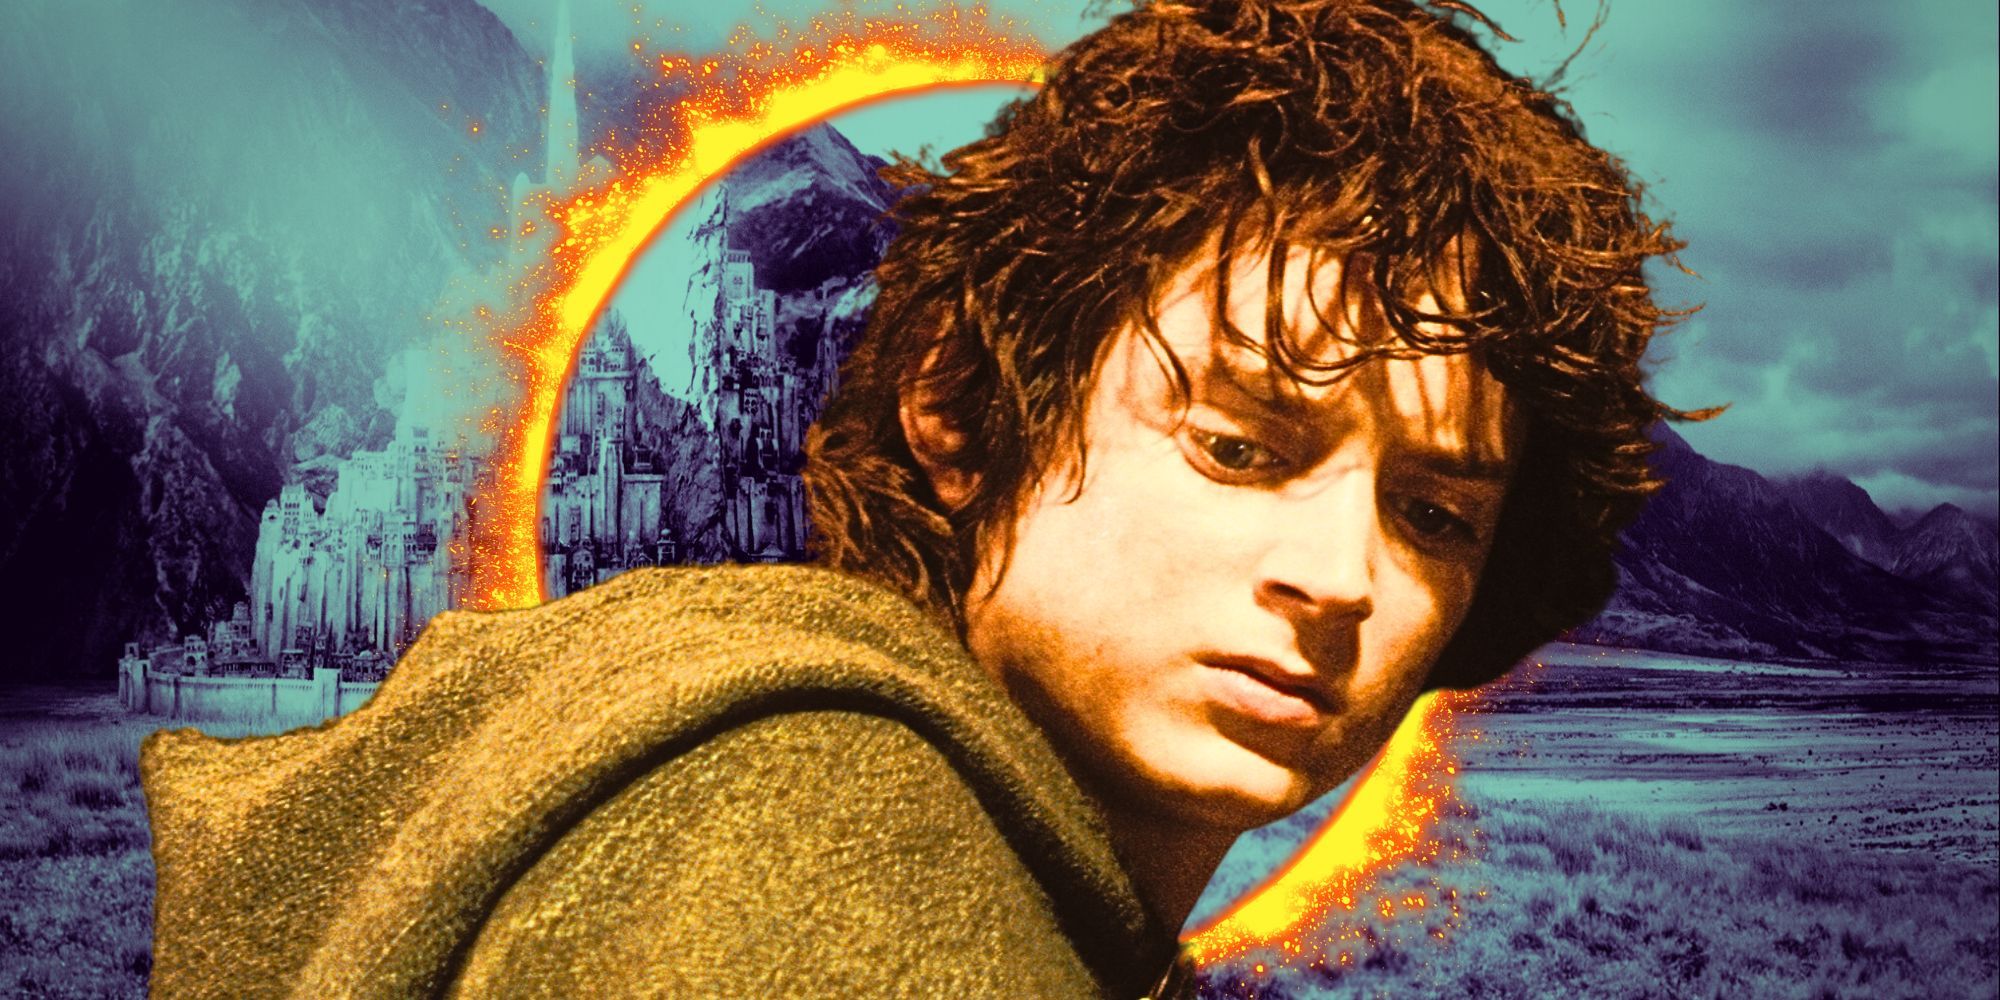 Find 'The Lord of the Rings: The Rings of Power' Casting Calls